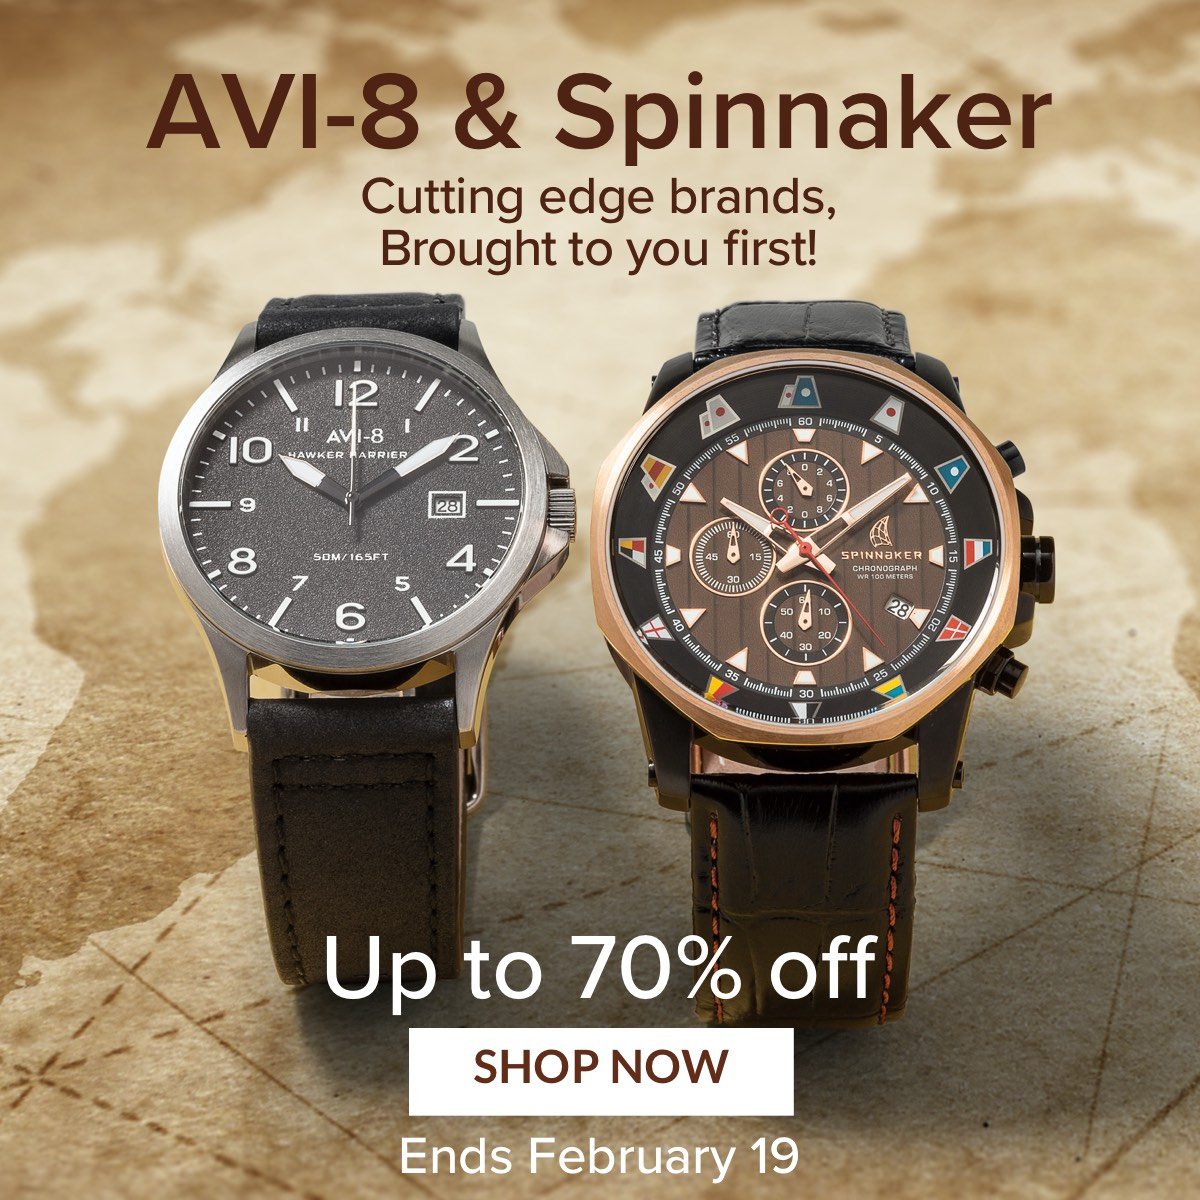 AVI-8 & Spinnaker Cutting edge brands, Brought to you first! Save up to 70%! Ends February 19